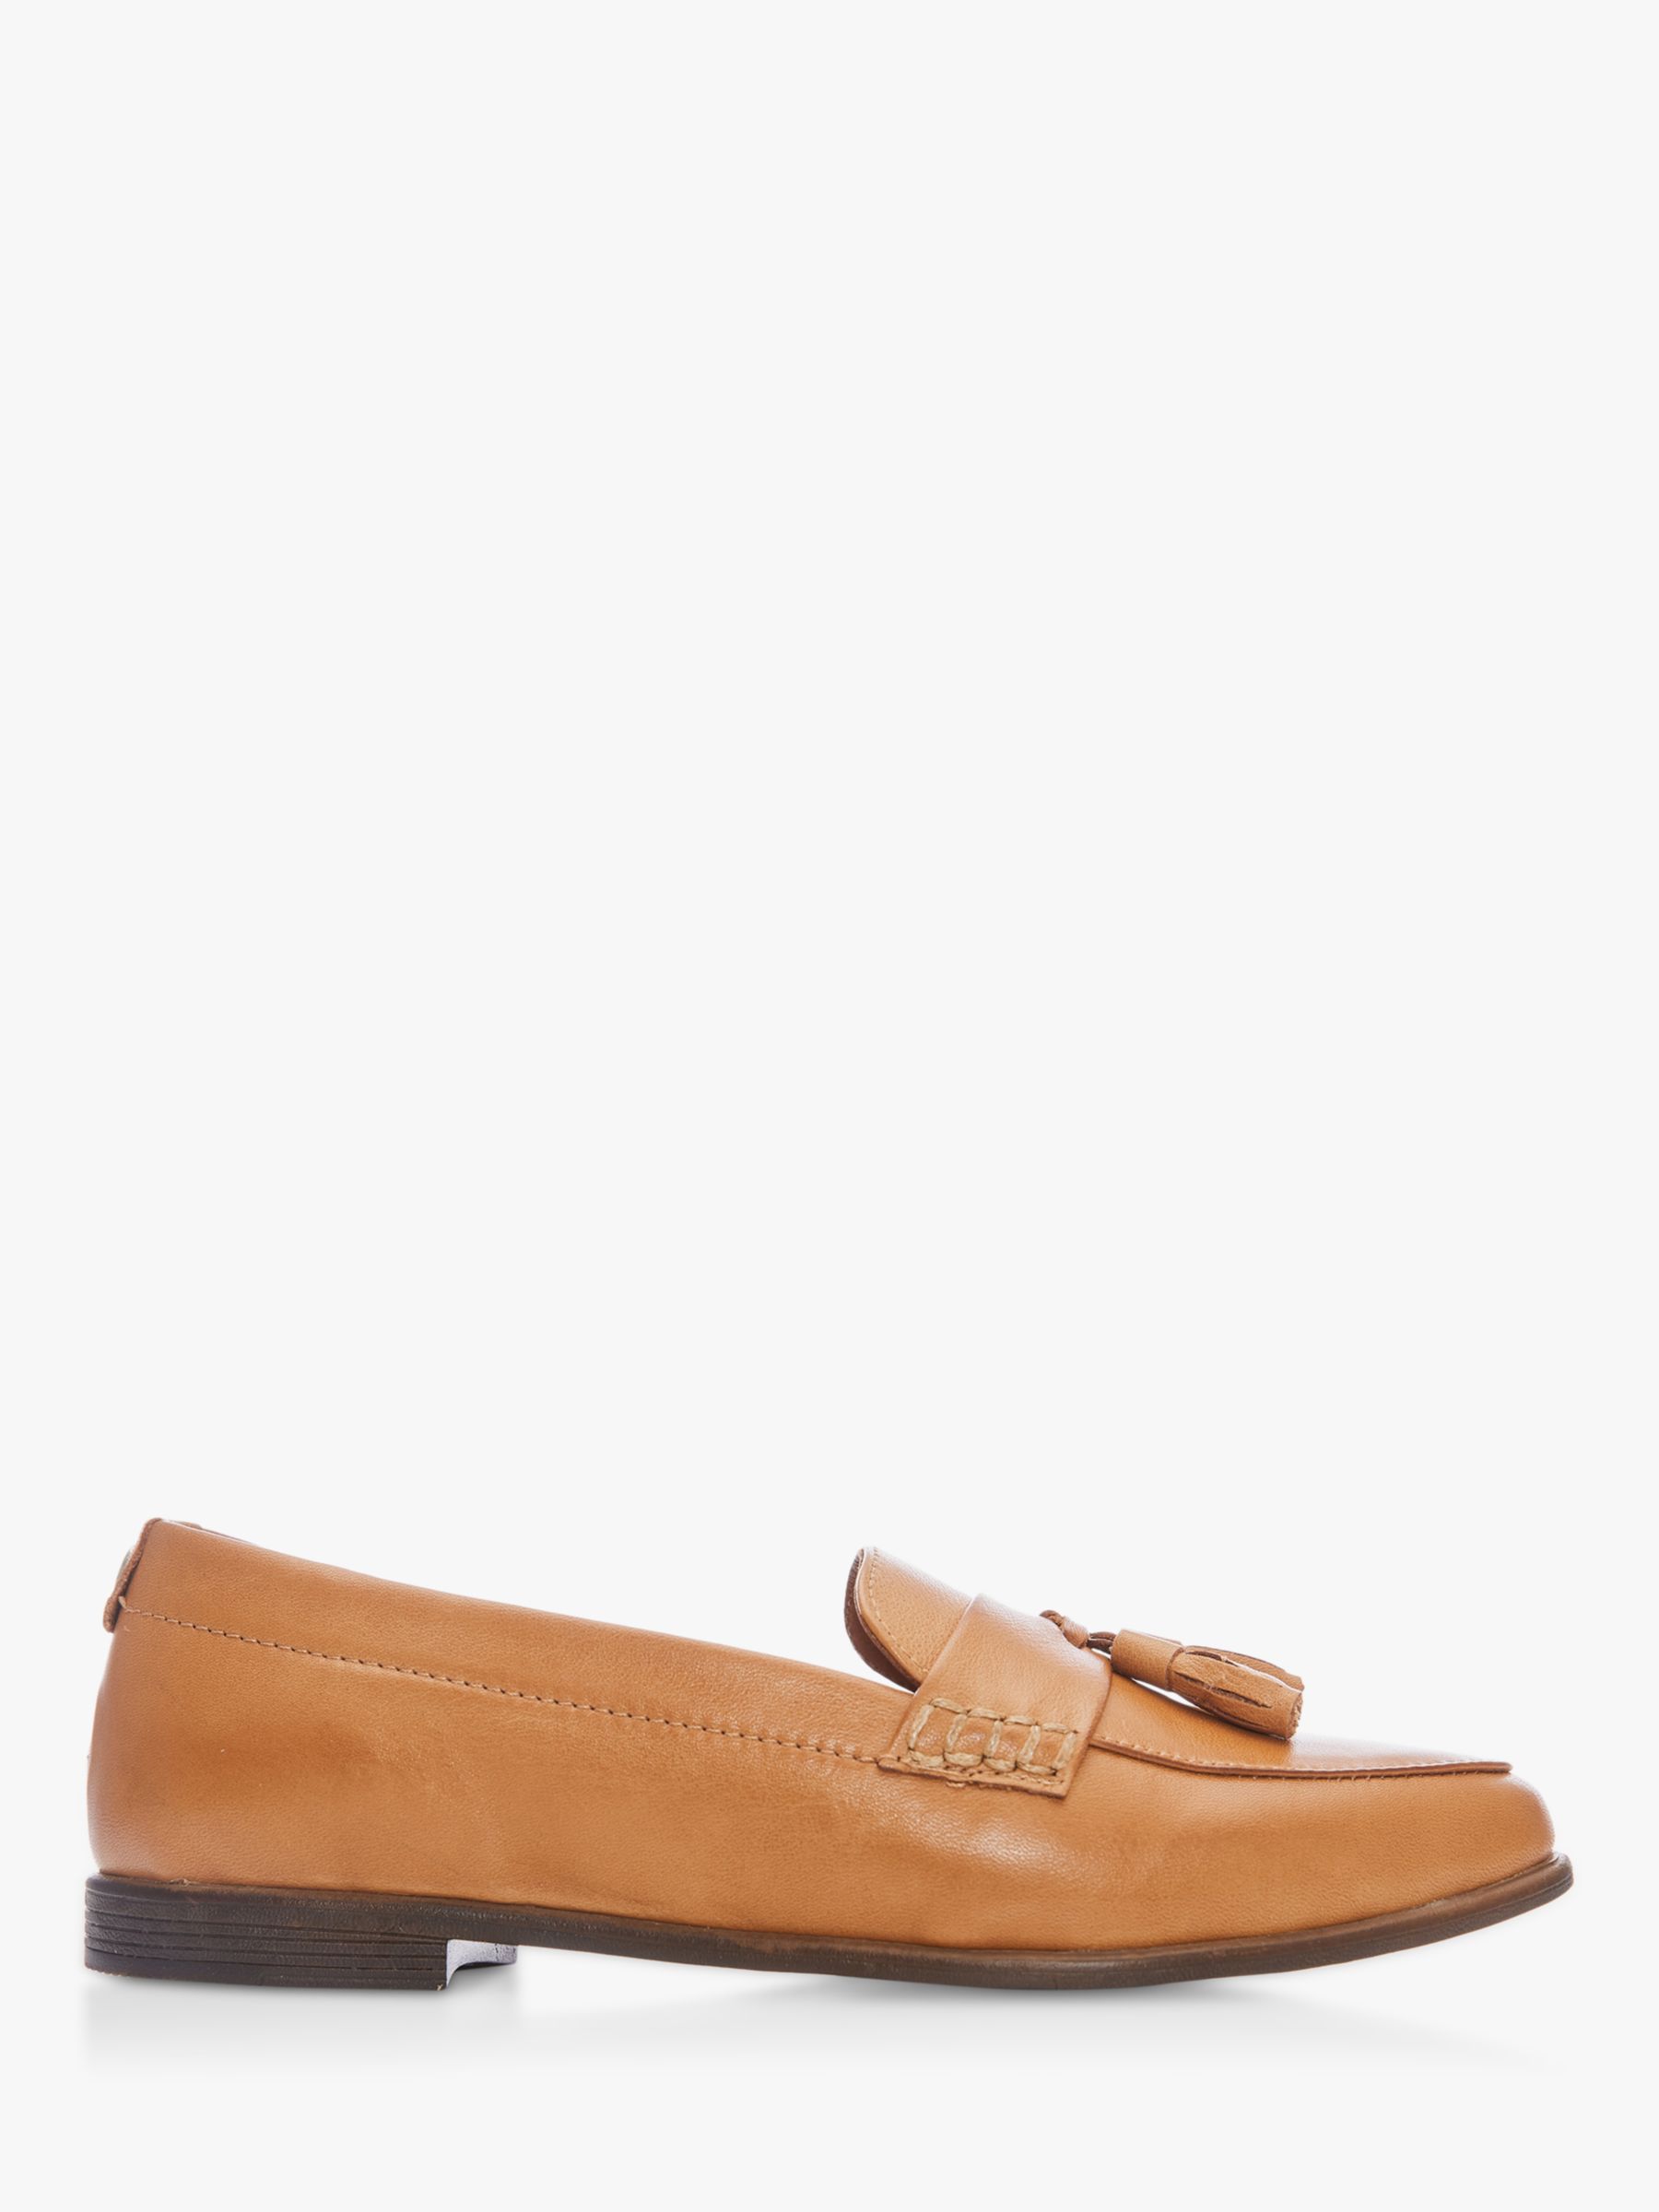 Moda in Pelle Forina Leather Square Toe Loafers, Tan at John Lewis ...